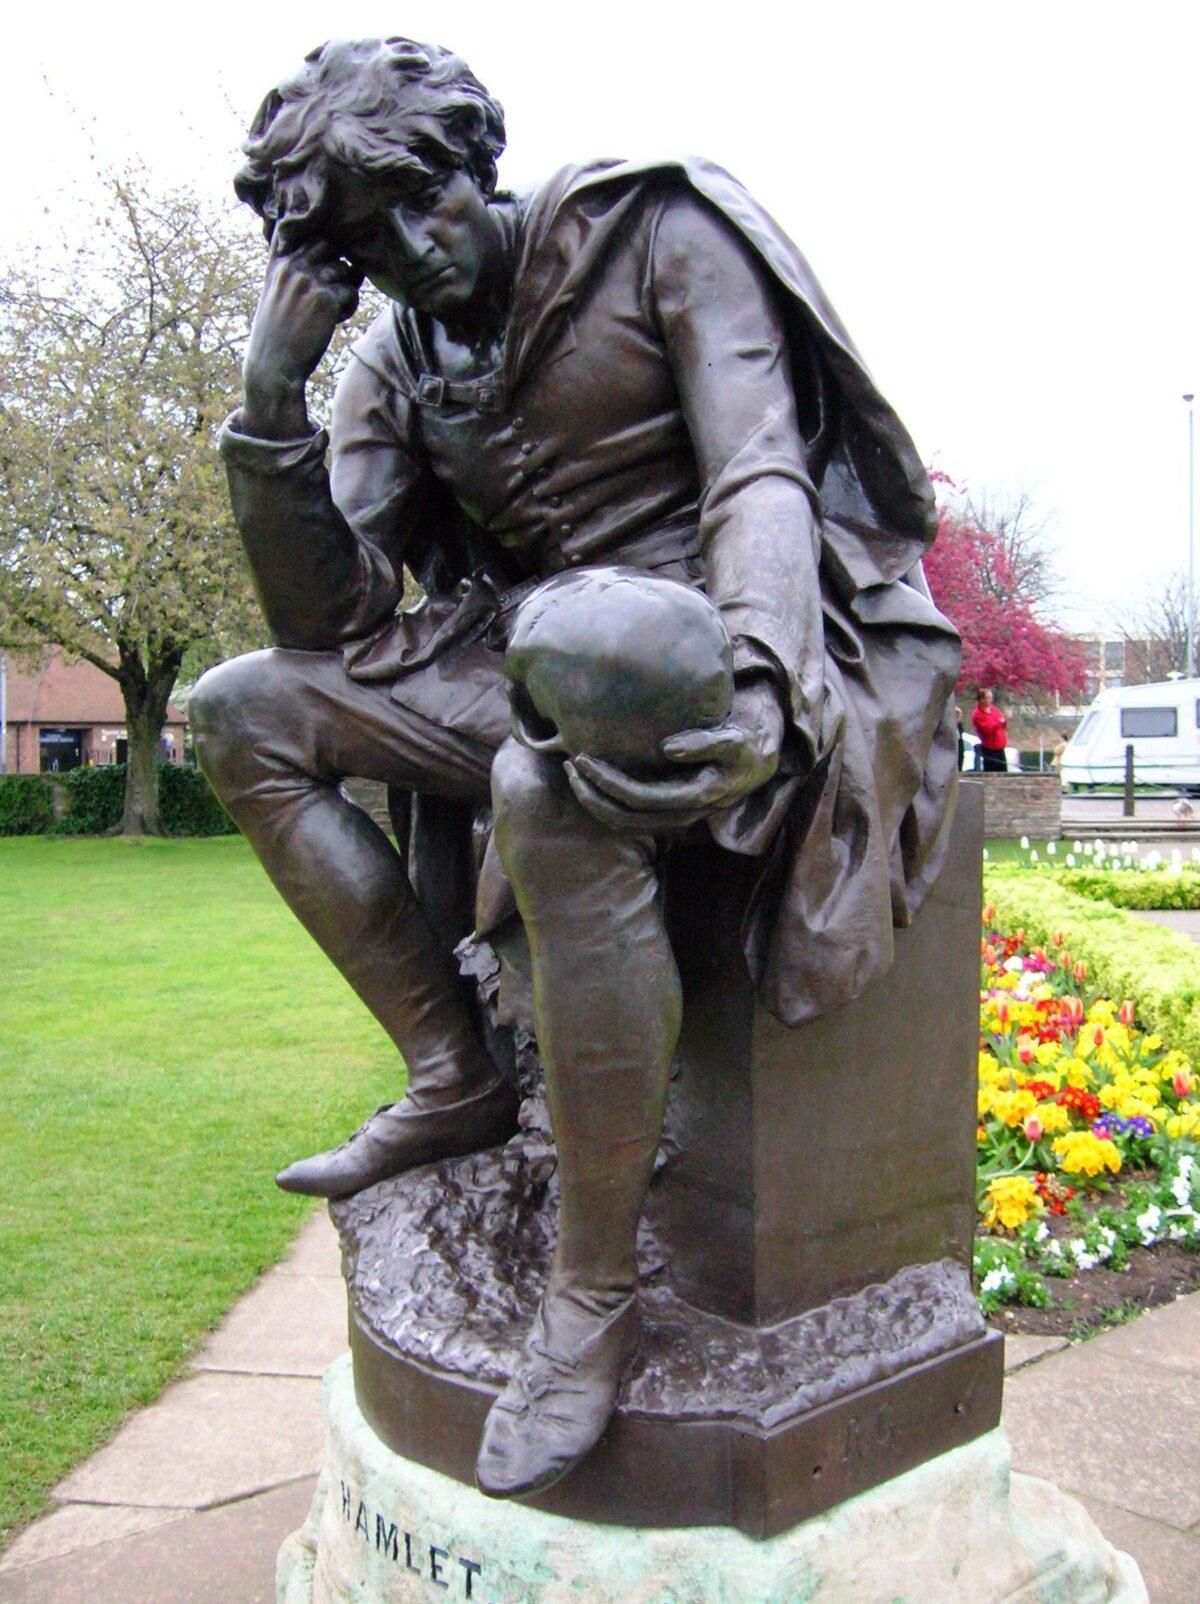 Prince Hamlet holding the skull of Yorick,19th century, by Ronald Gower. Stratford-upon-Avon. (Public Domain)